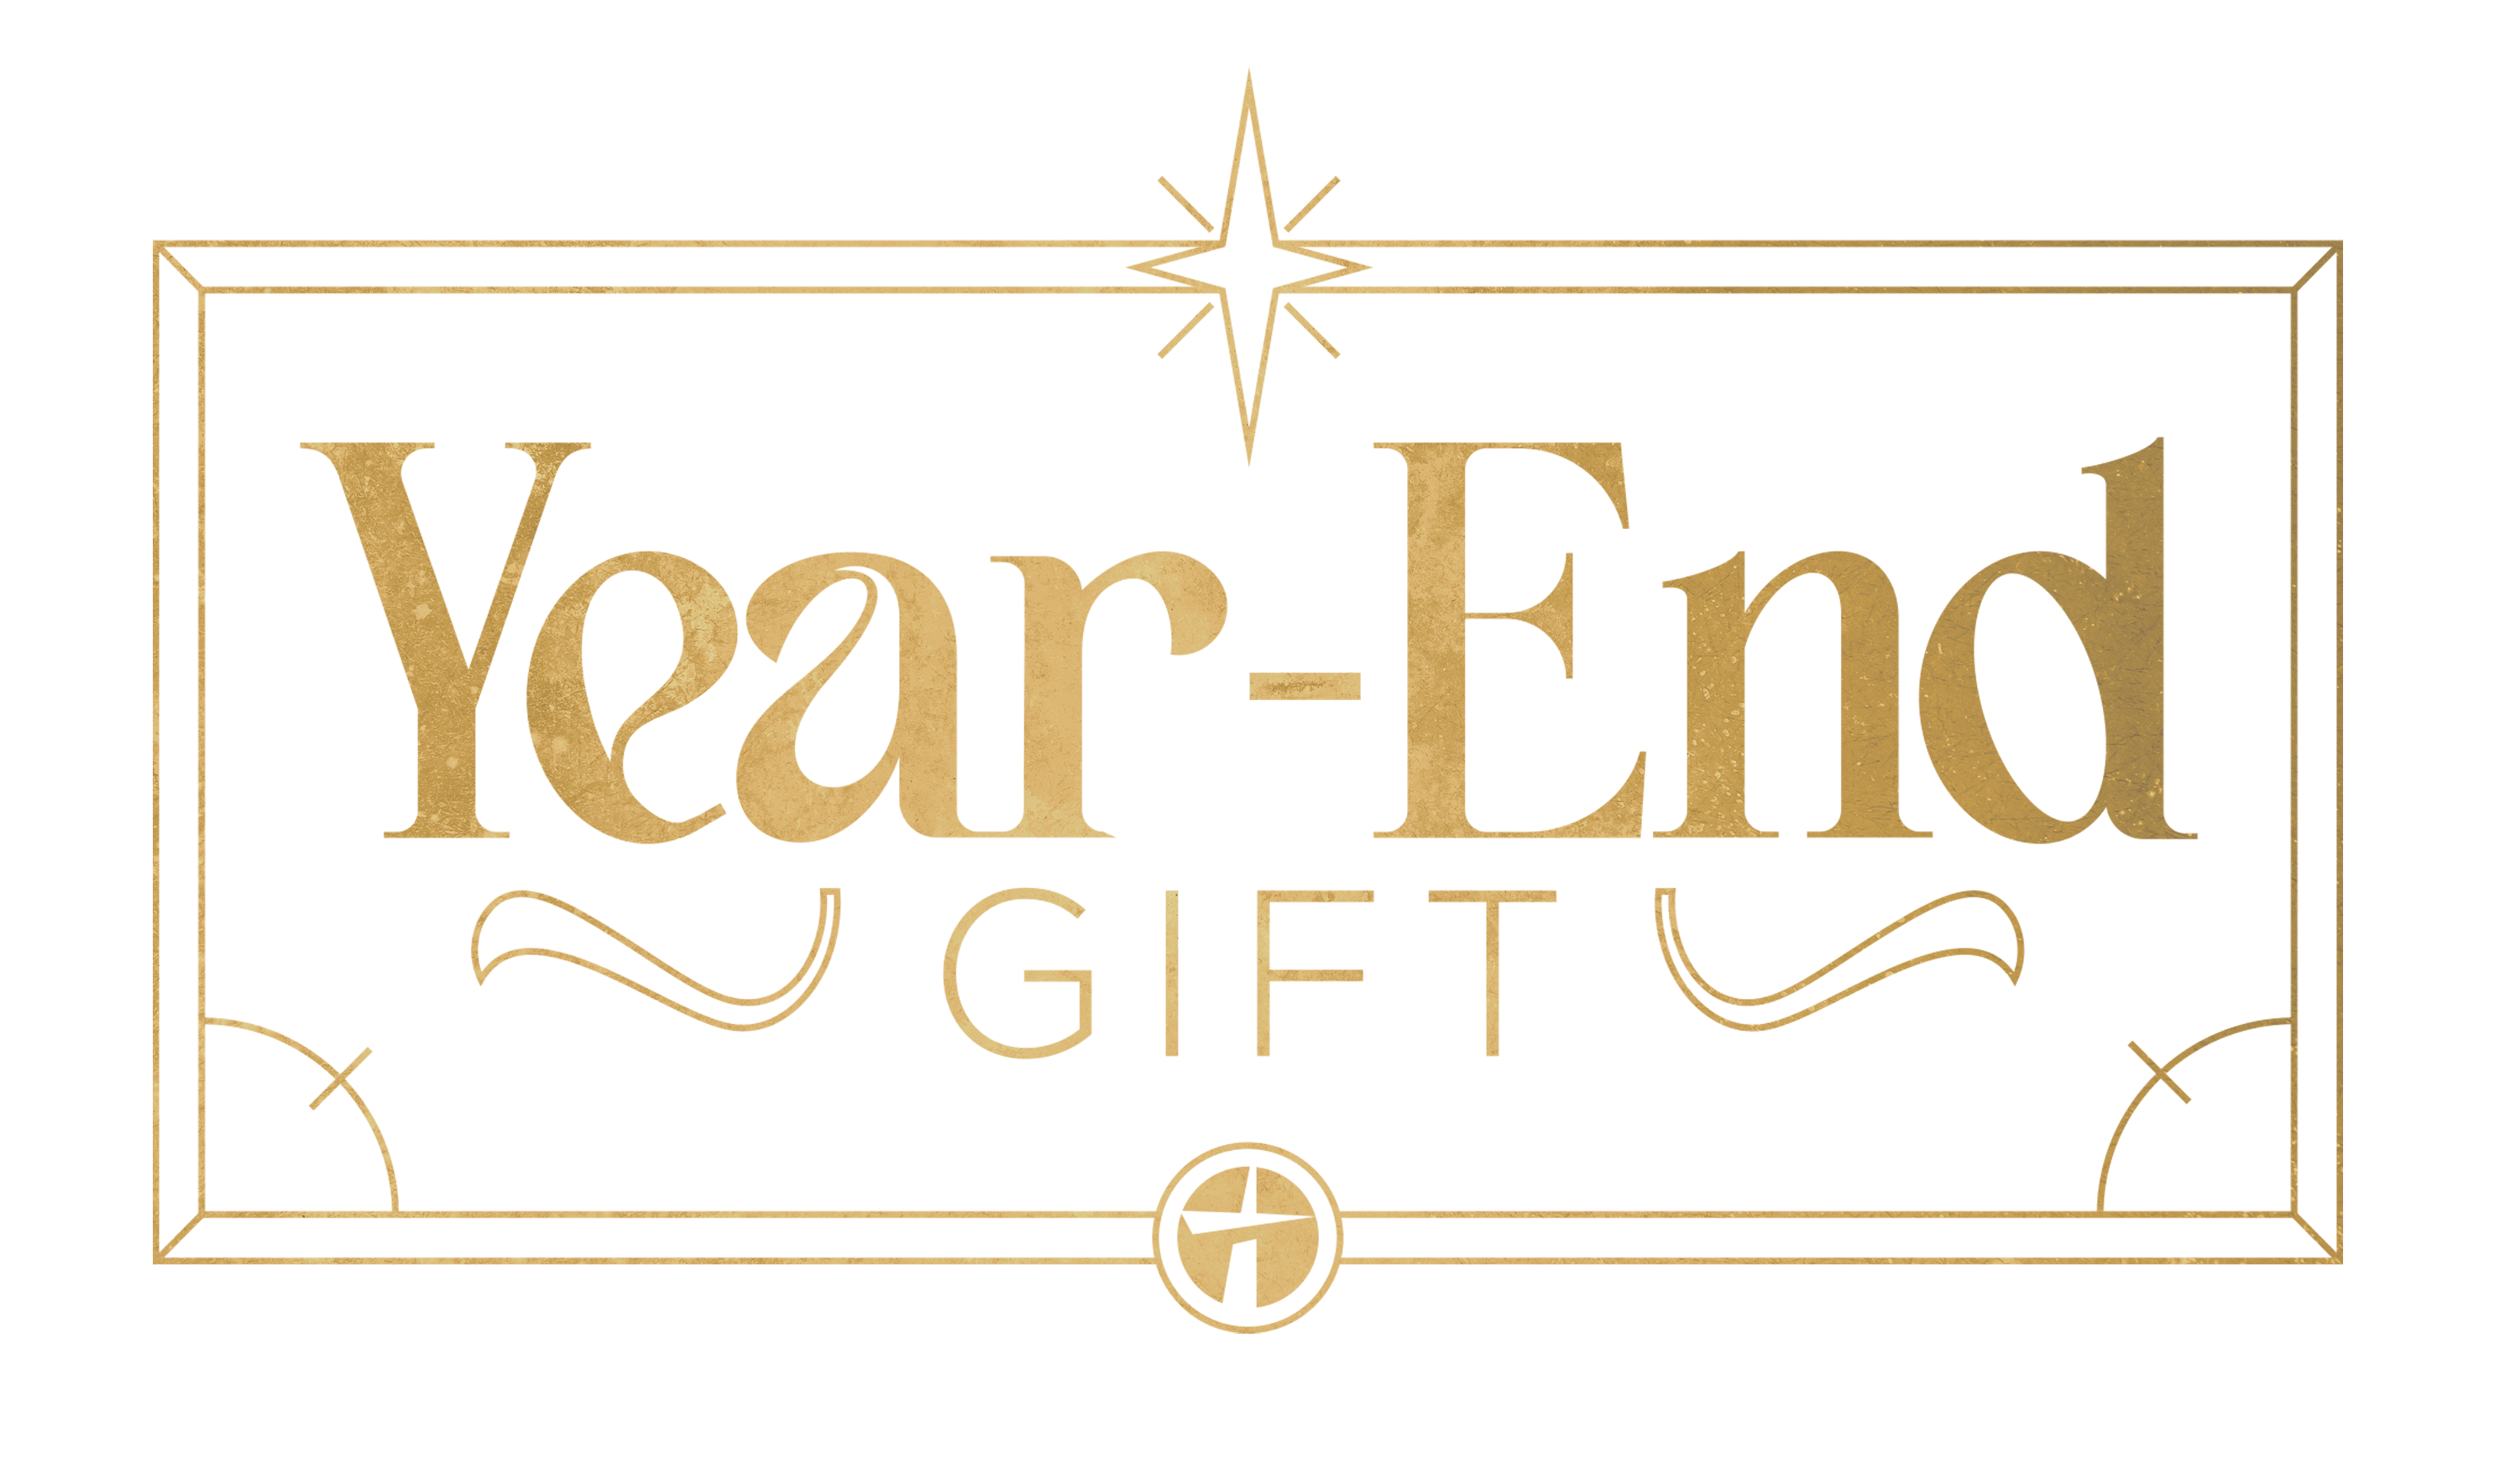 https://thecrossing.com/wp-content/uploads/2023/11/Year-End-Gift-2023-LogoWEb.png